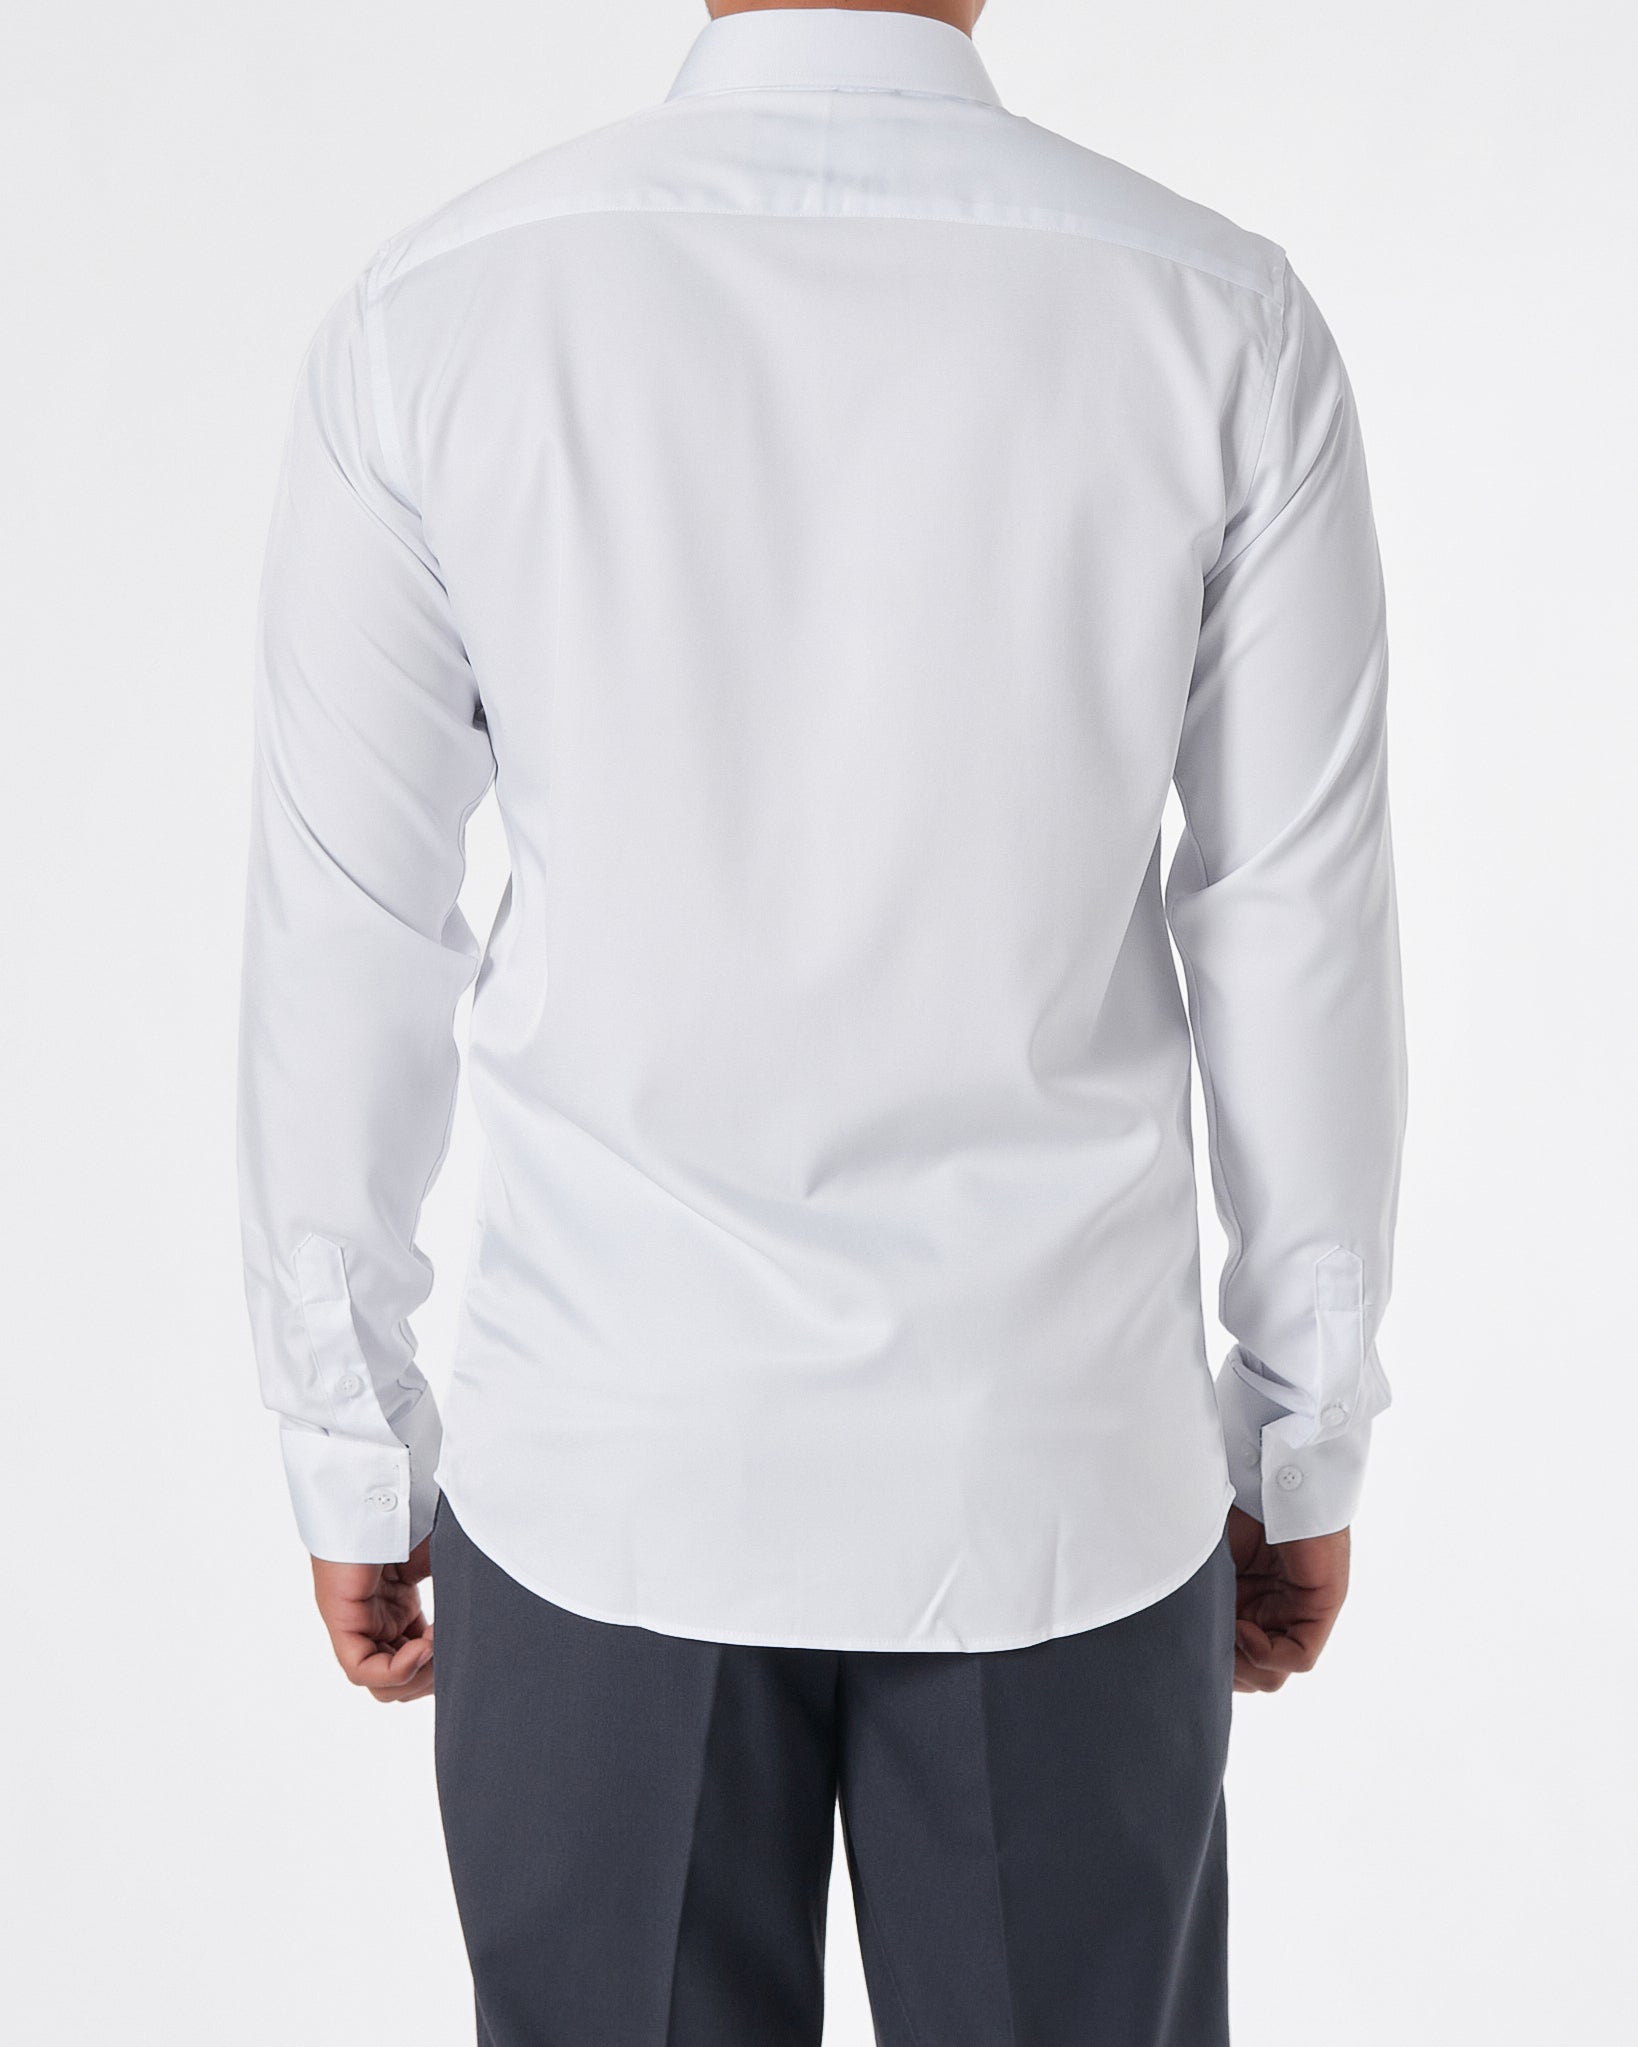 BUR Casual Fit Logo Embroidered Men White Shirts Long Sleeve 22.90